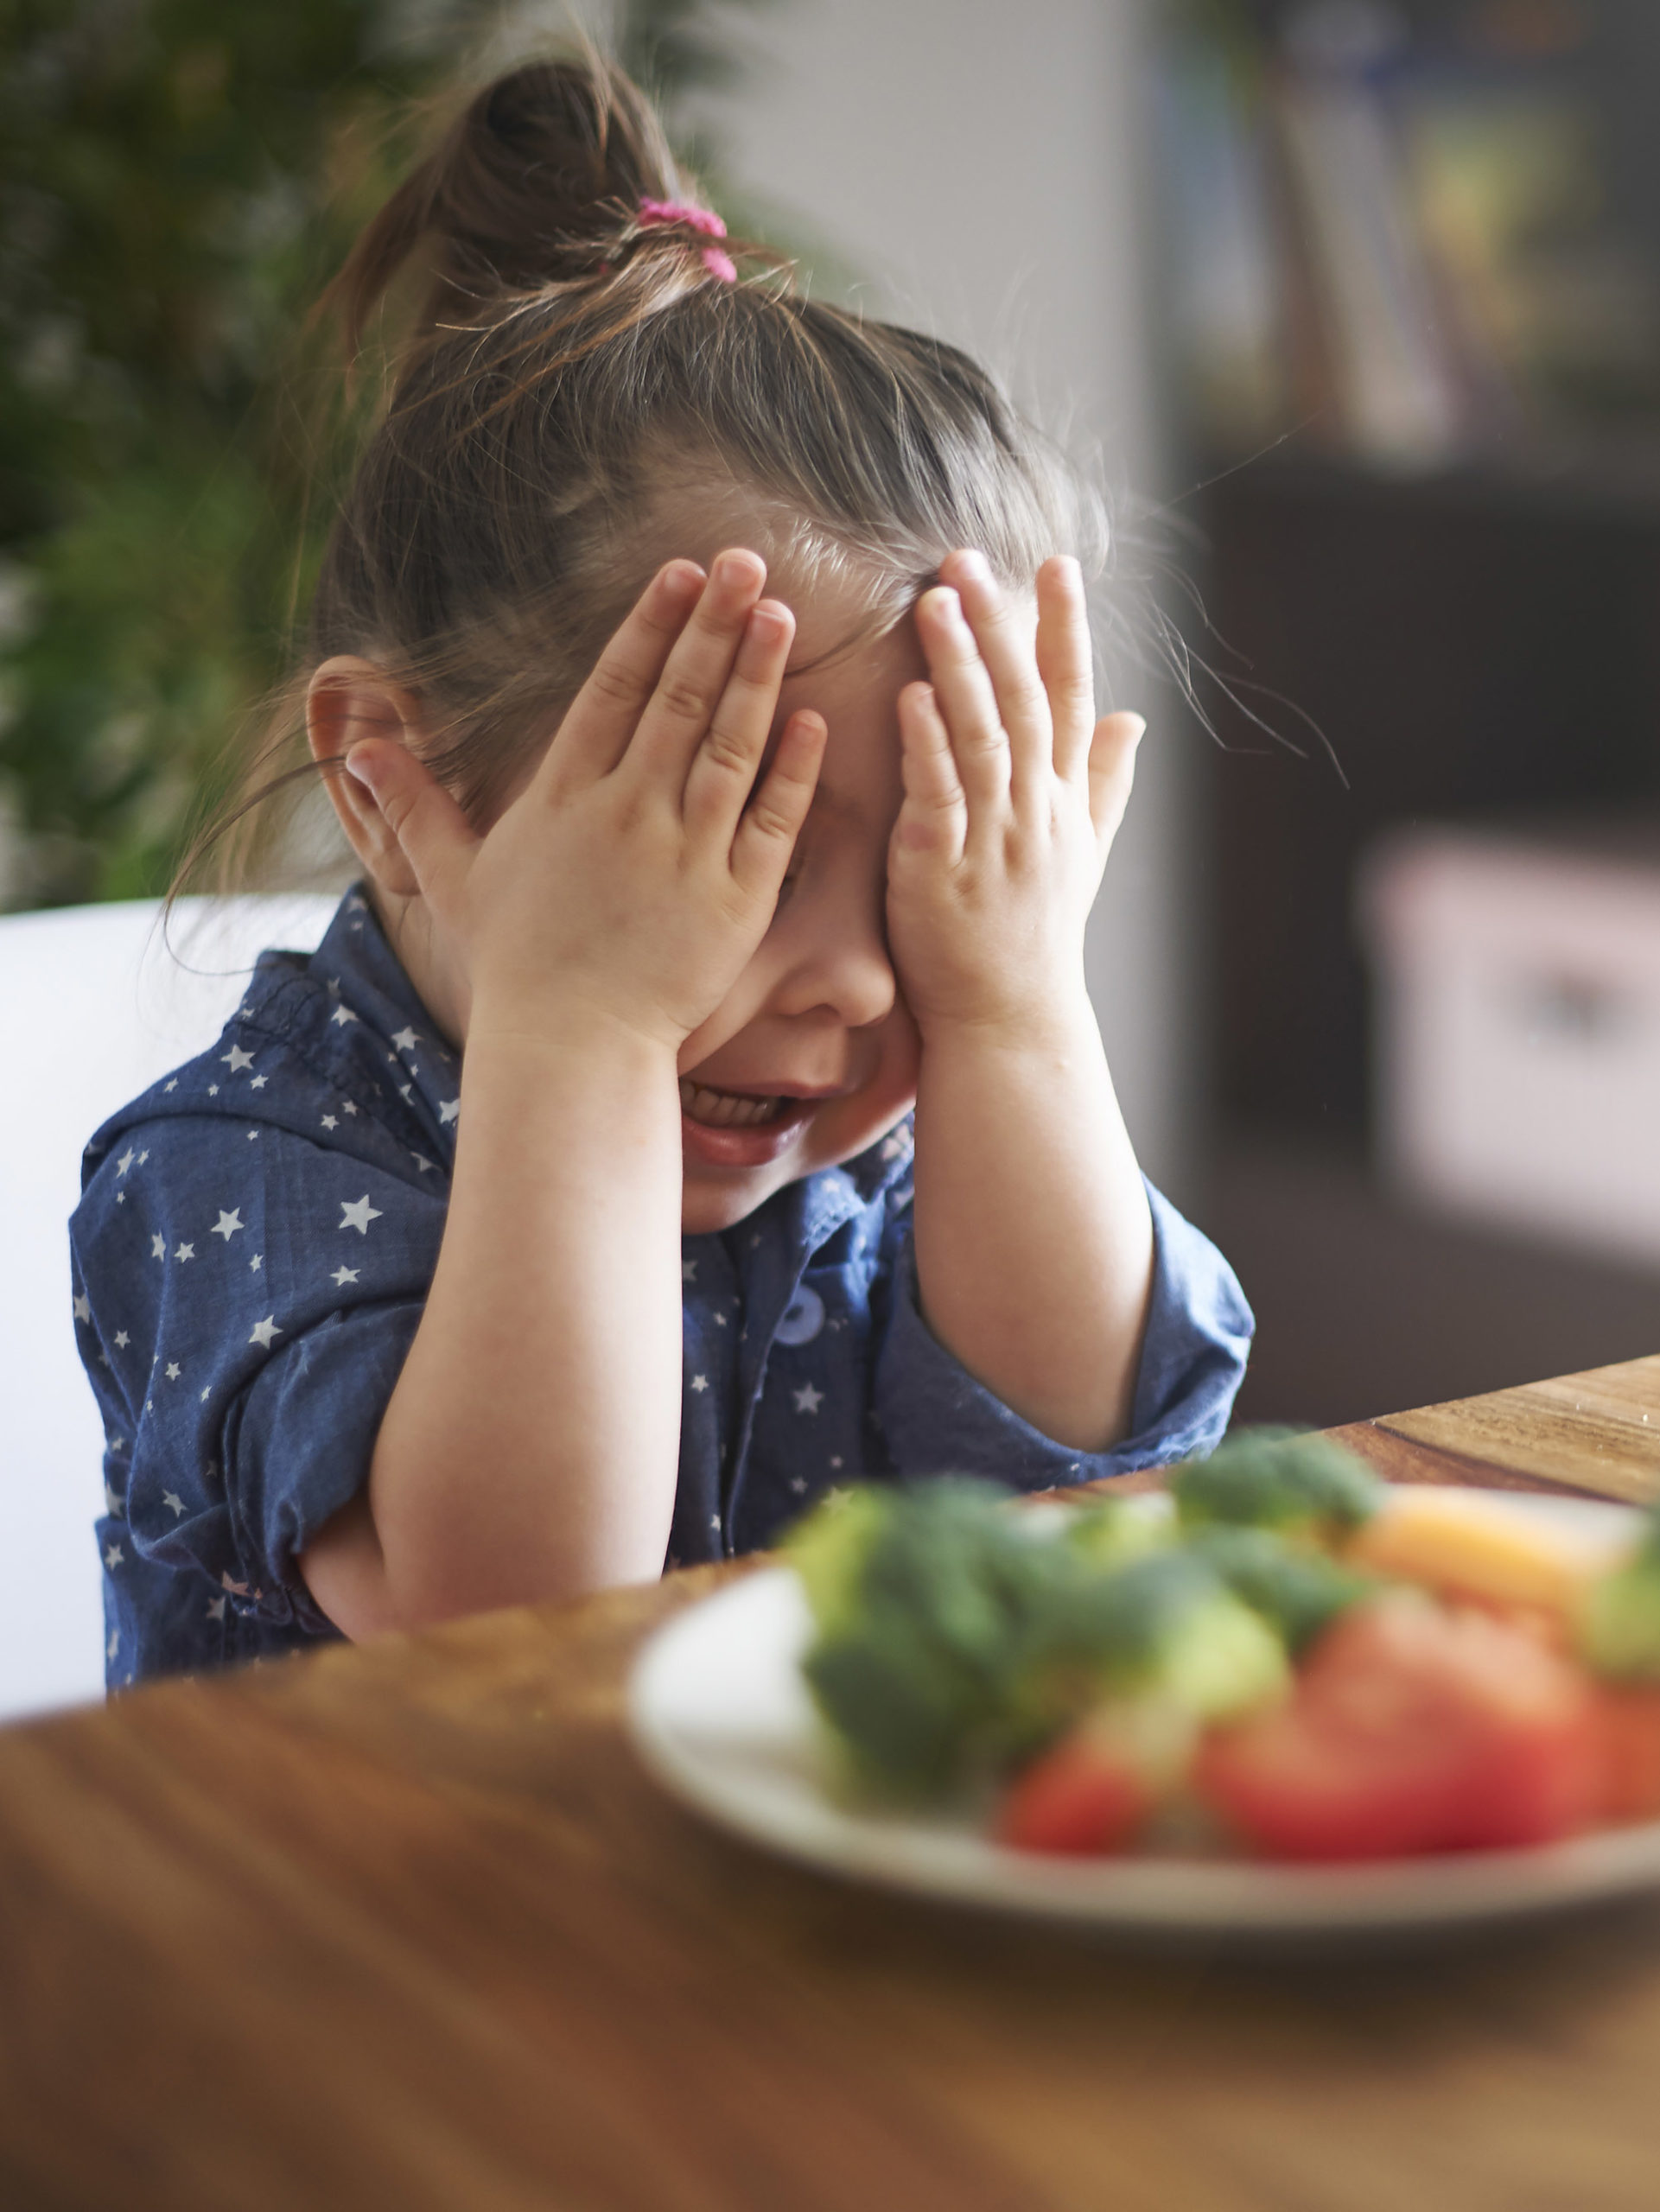 Little girl putting her hands over her eyes because she doesn't want to eat vegetables